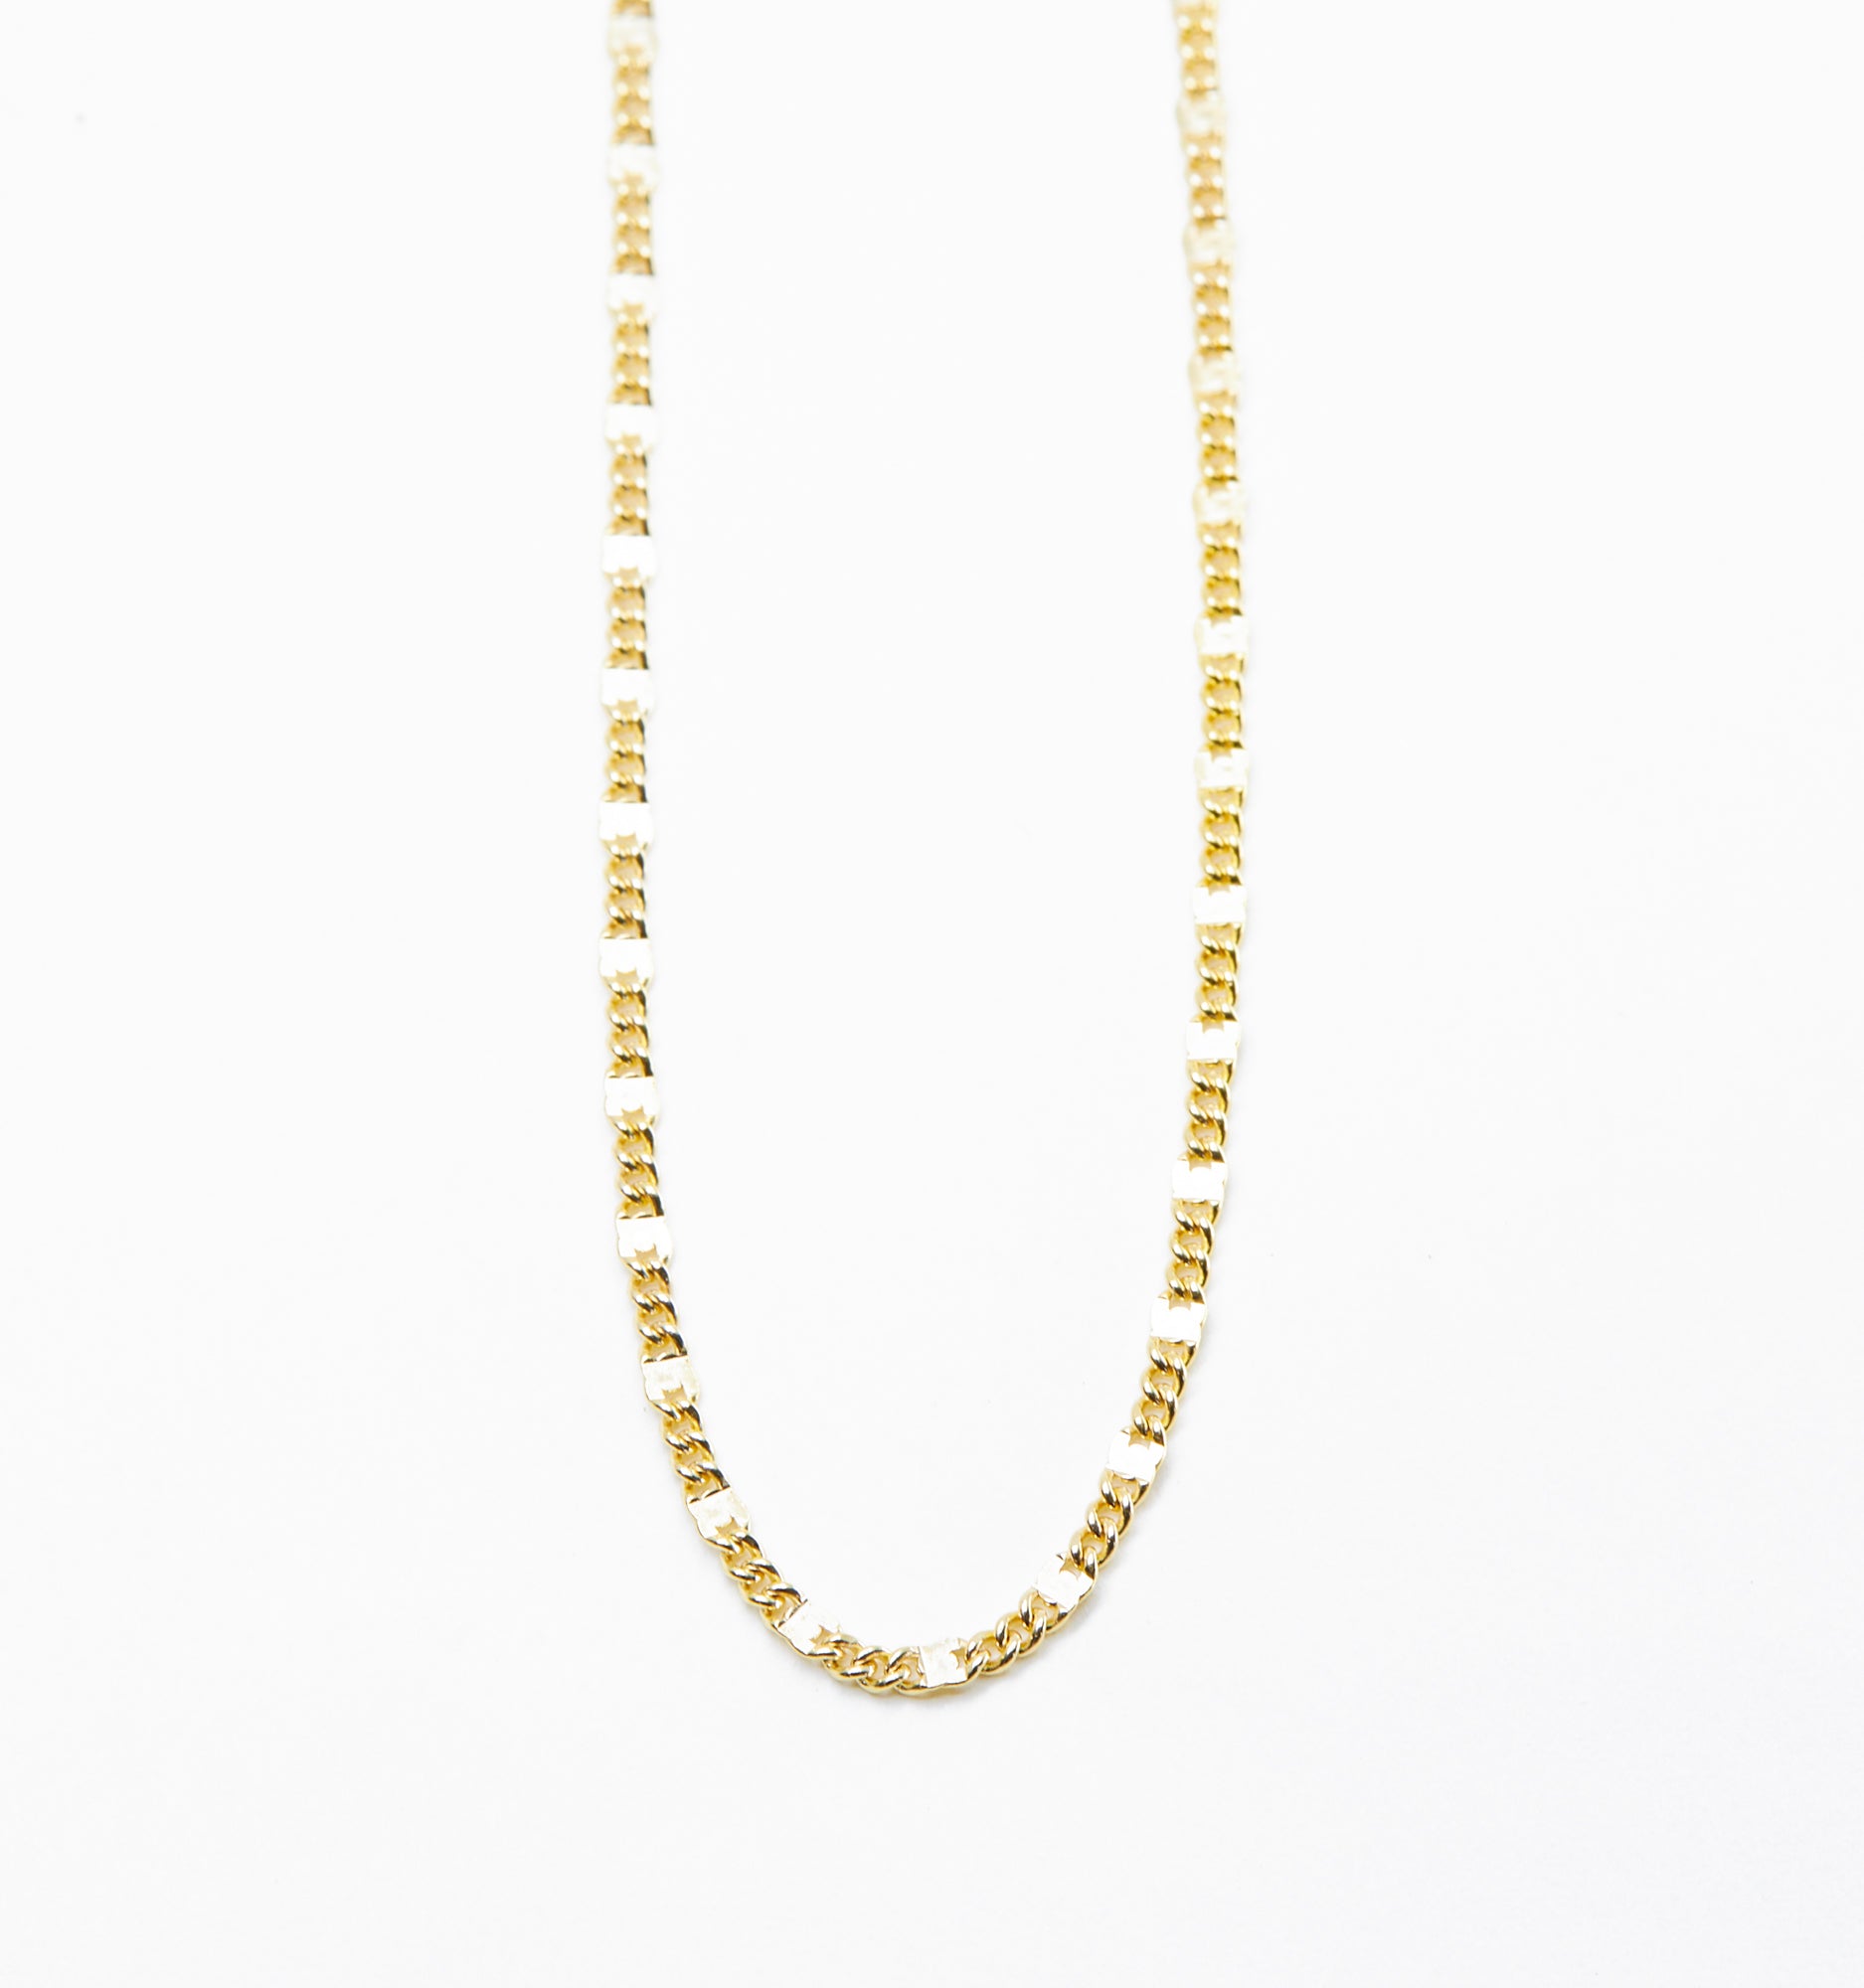 Lace Gold Chain Necklace